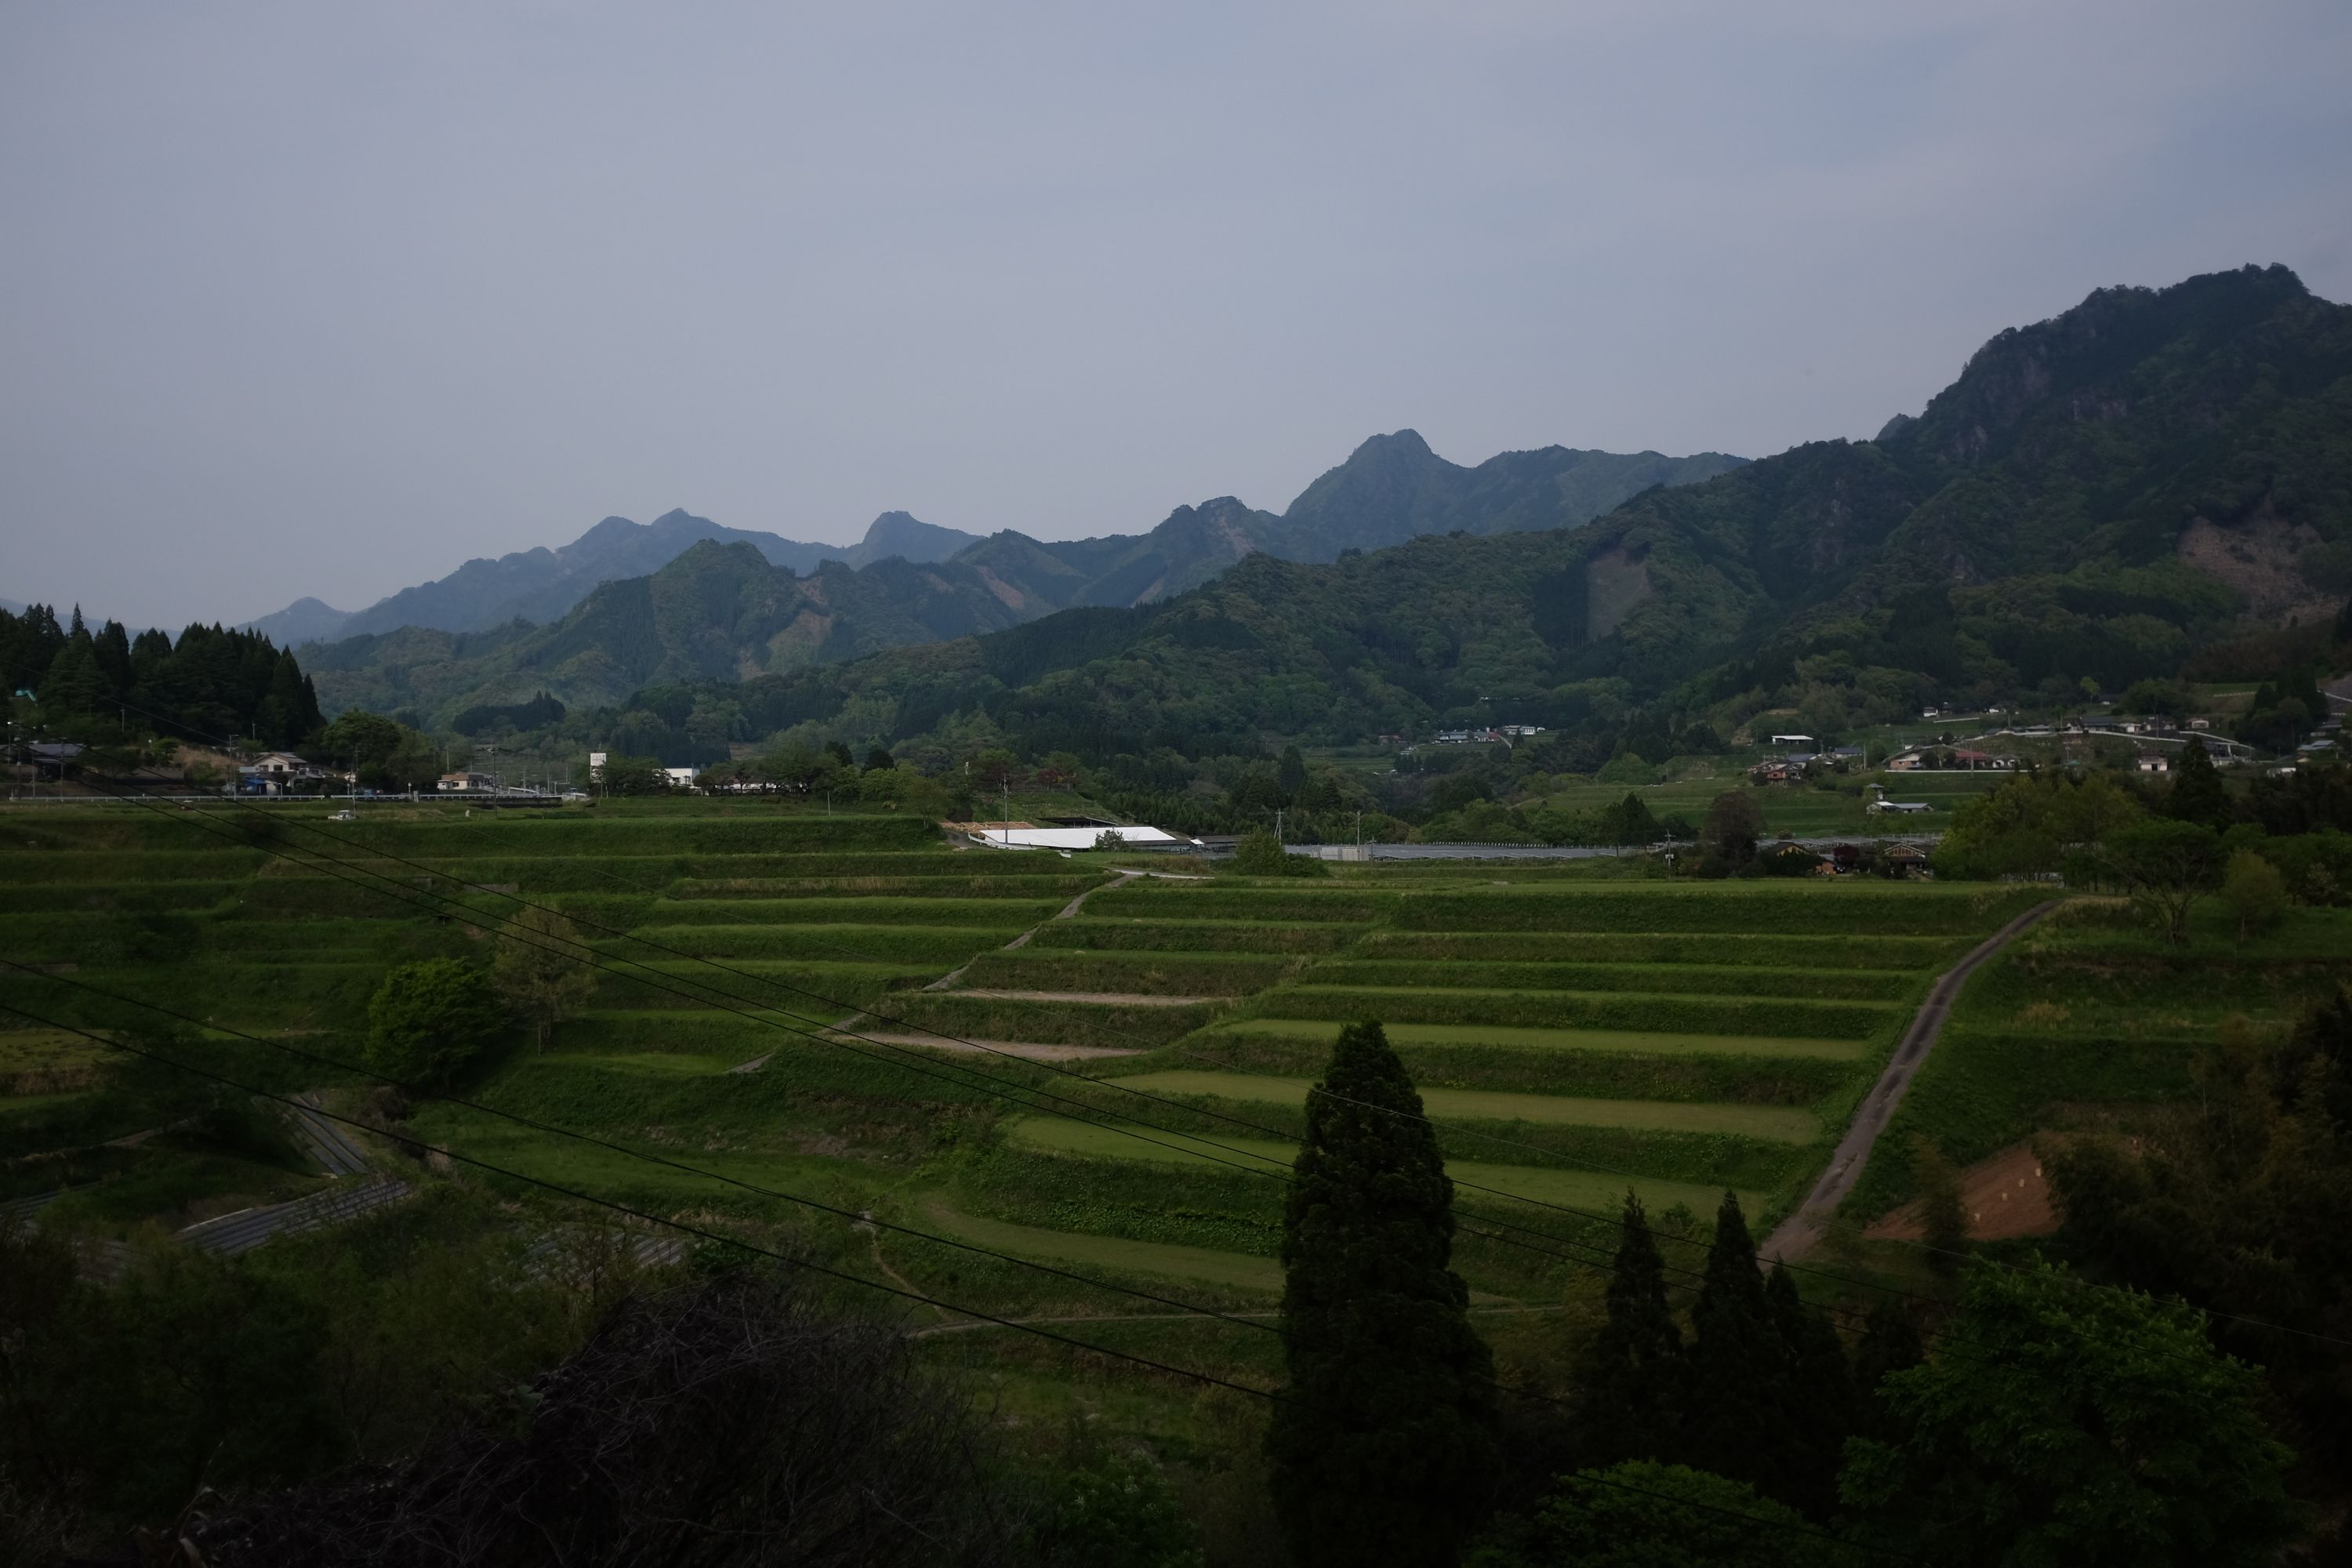 Panorama of terraced ricefields and jagged, forested mountains.